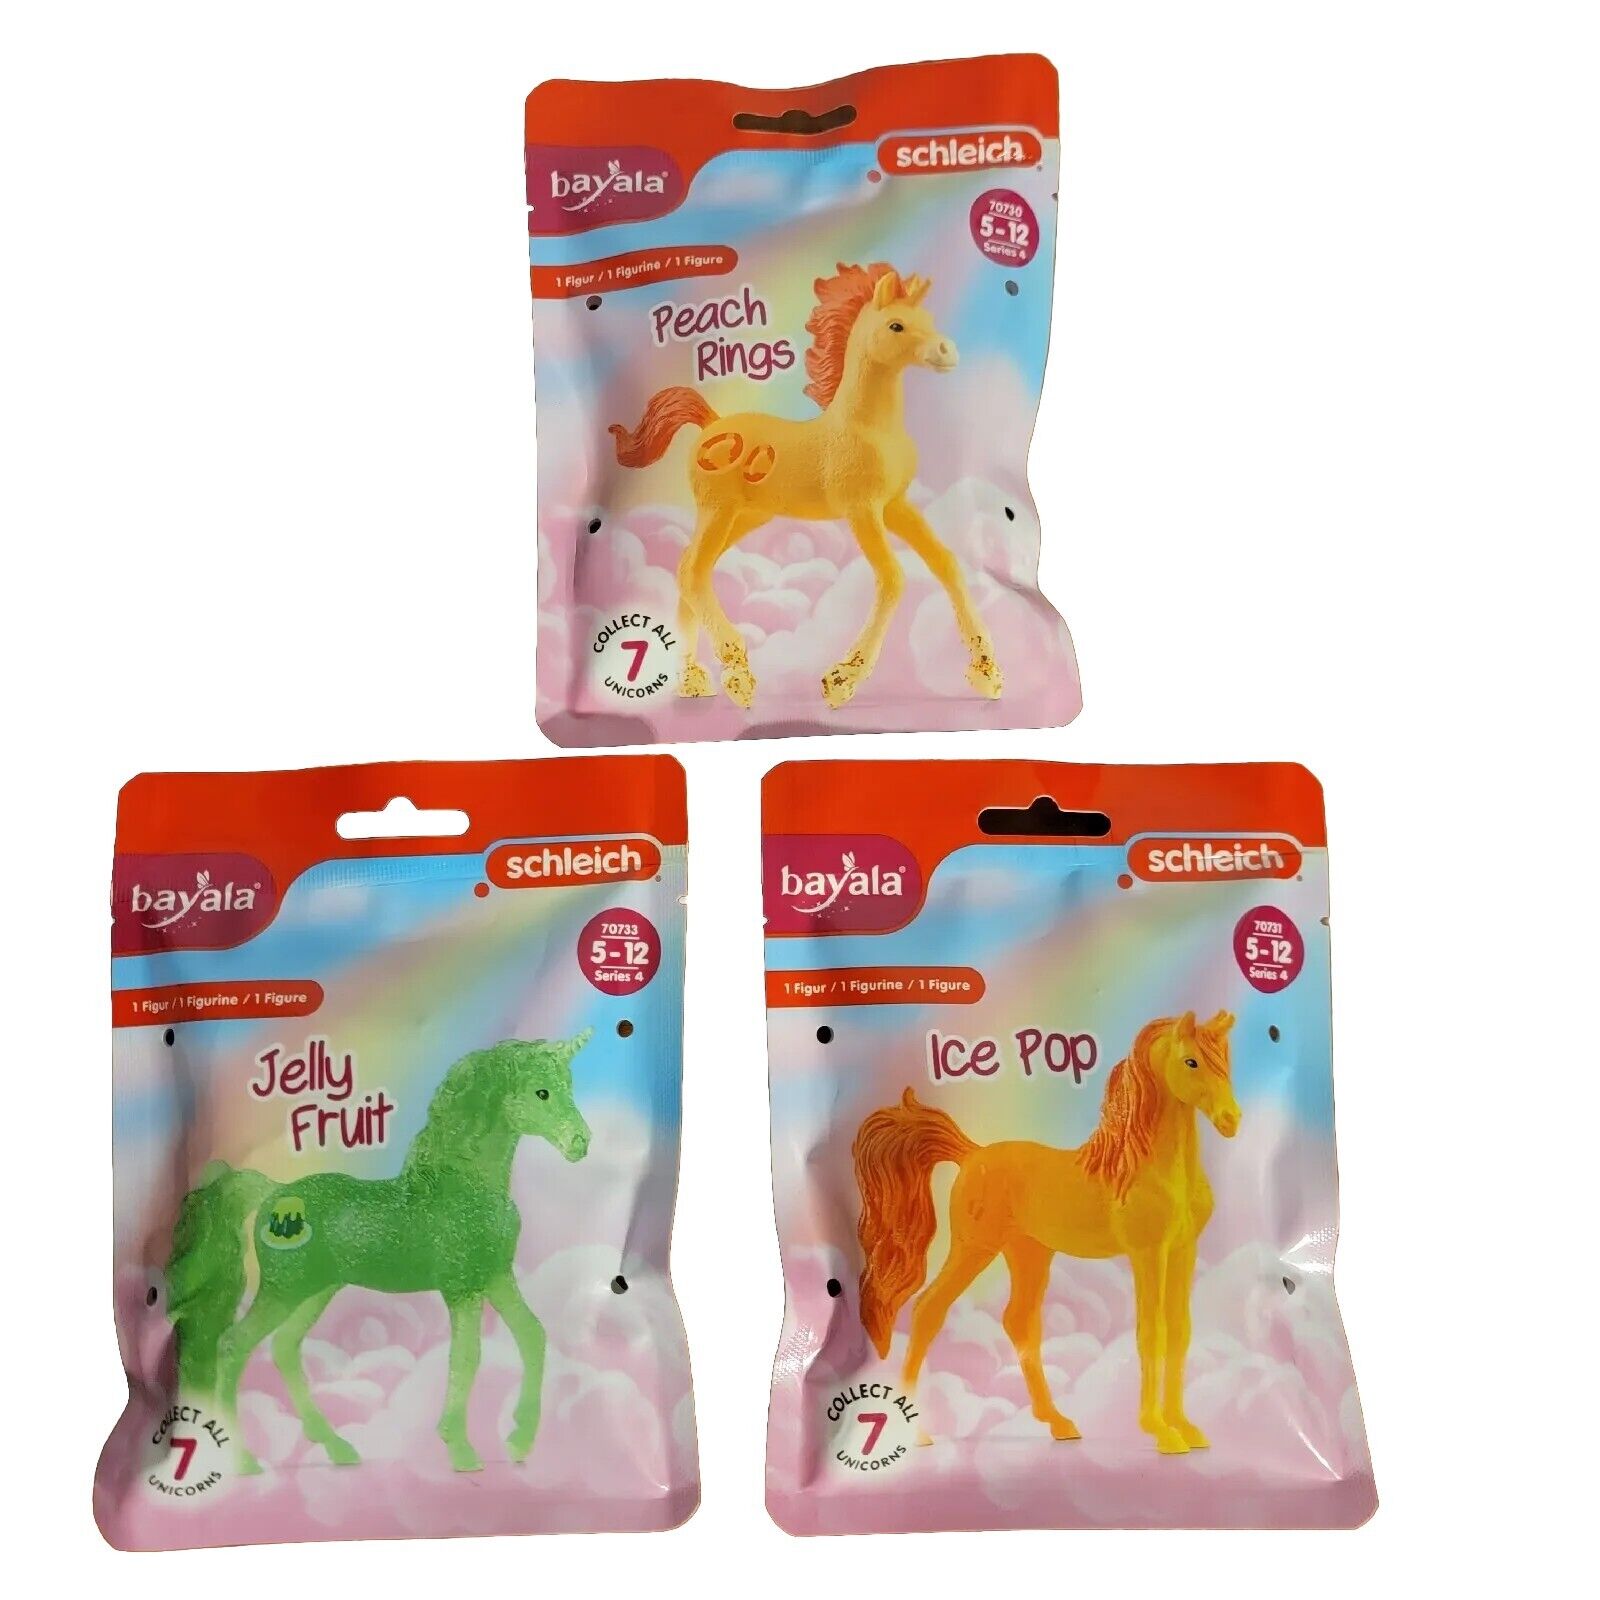 Schleich Bayala Horses 3 Unopened Bags Peach Rings, Jelly Fruit and Ice Pop